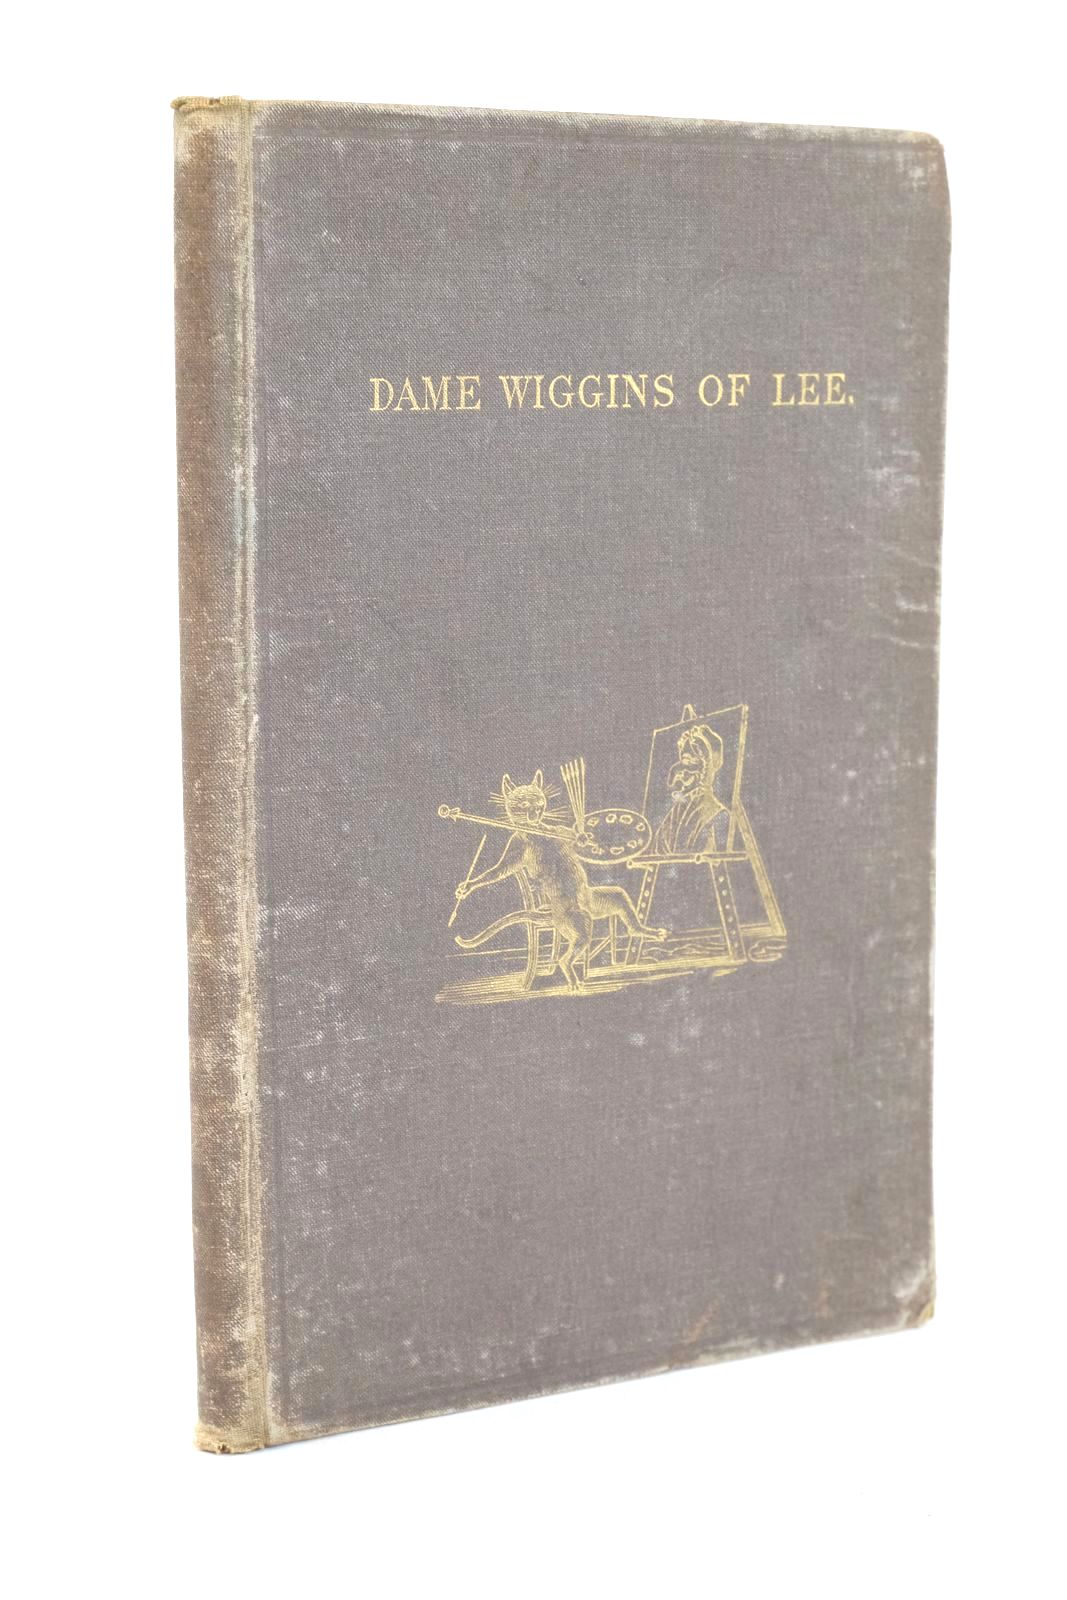 Photo of DAME WIGGINS OF LEE AND HER SEVEN WONDERFUL CATS written by Ruskin, John illustrated by Greenaway, Kate published by George Allen (STOCK CODE: 1325425)  for sale by Stella & Rose's Books